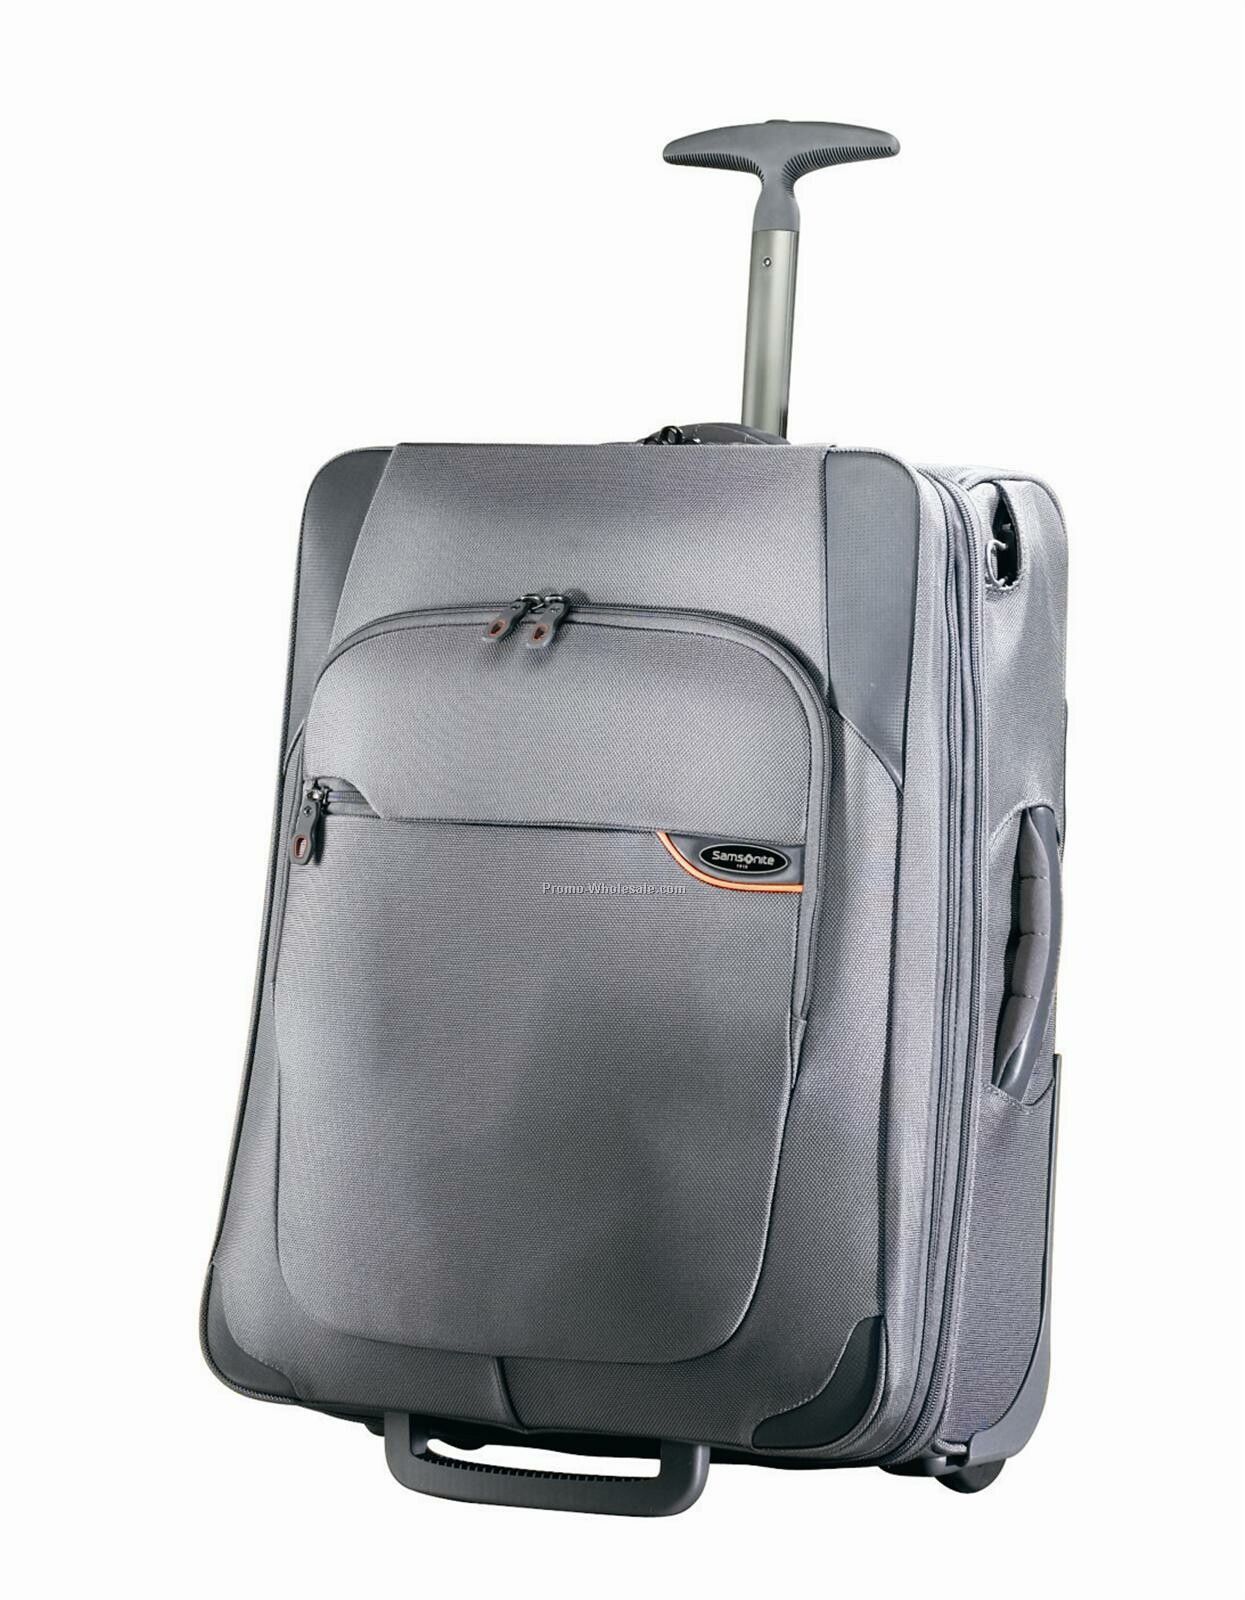 Pro-dlx Mobile Office 18 Upright Backpack